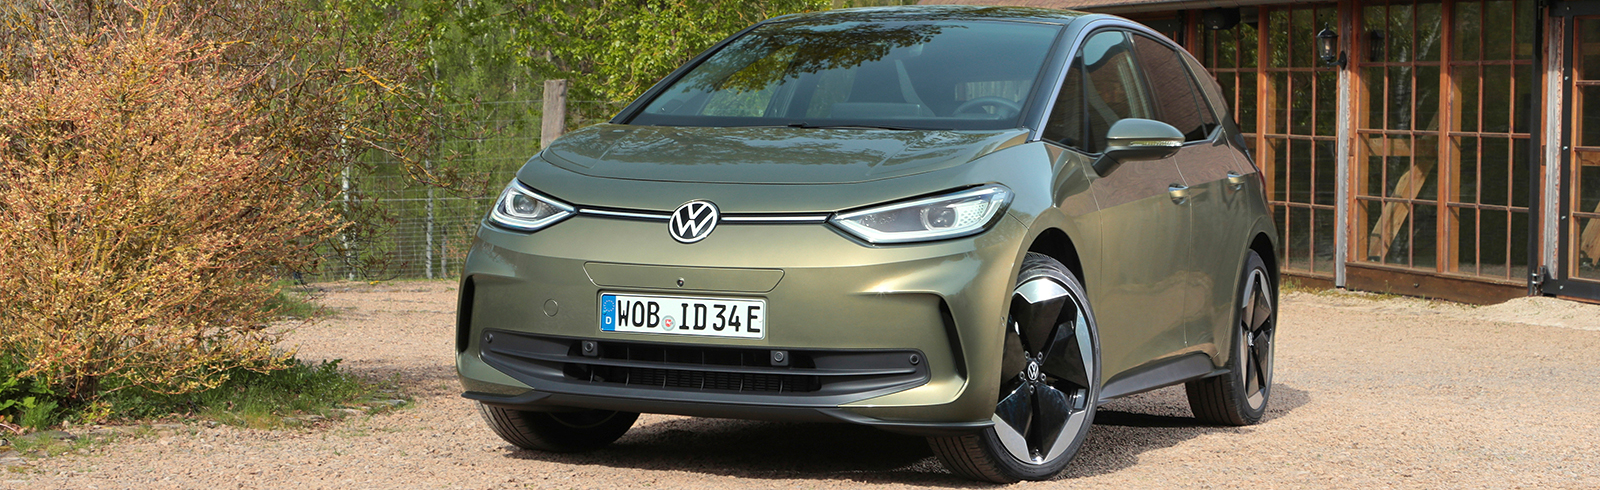 The new Volkswagen ID.3 arrives with several upgrades, launches with the ID.3 Pro S model